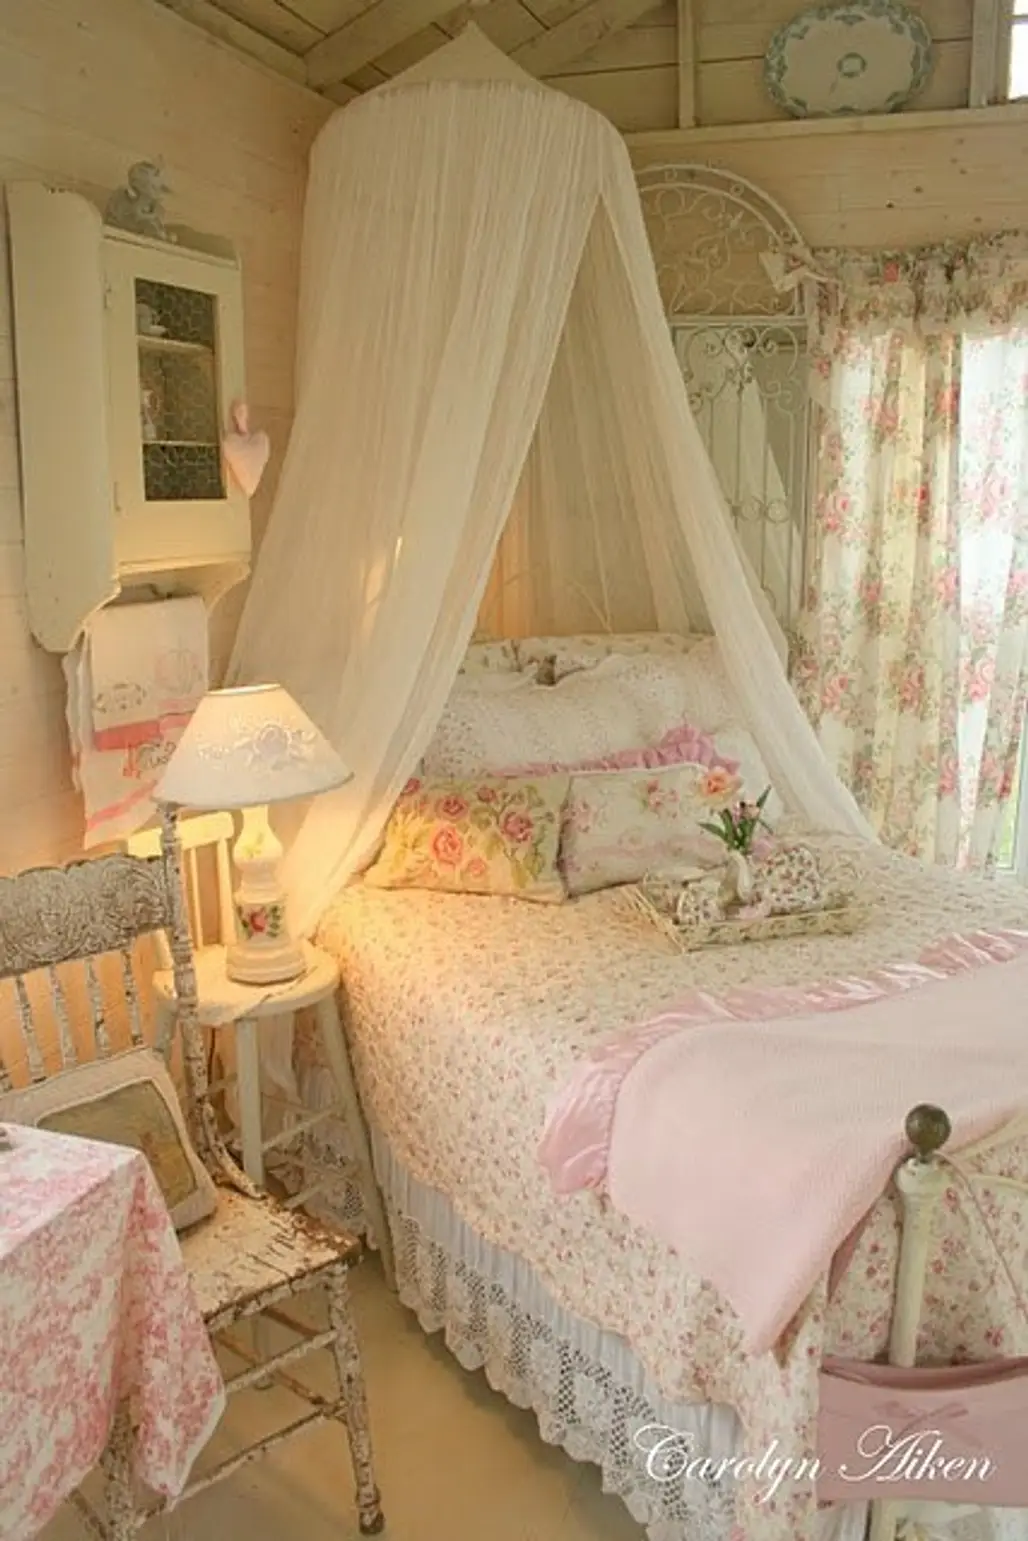 mosquito net,room,bed,furniture,cottage,